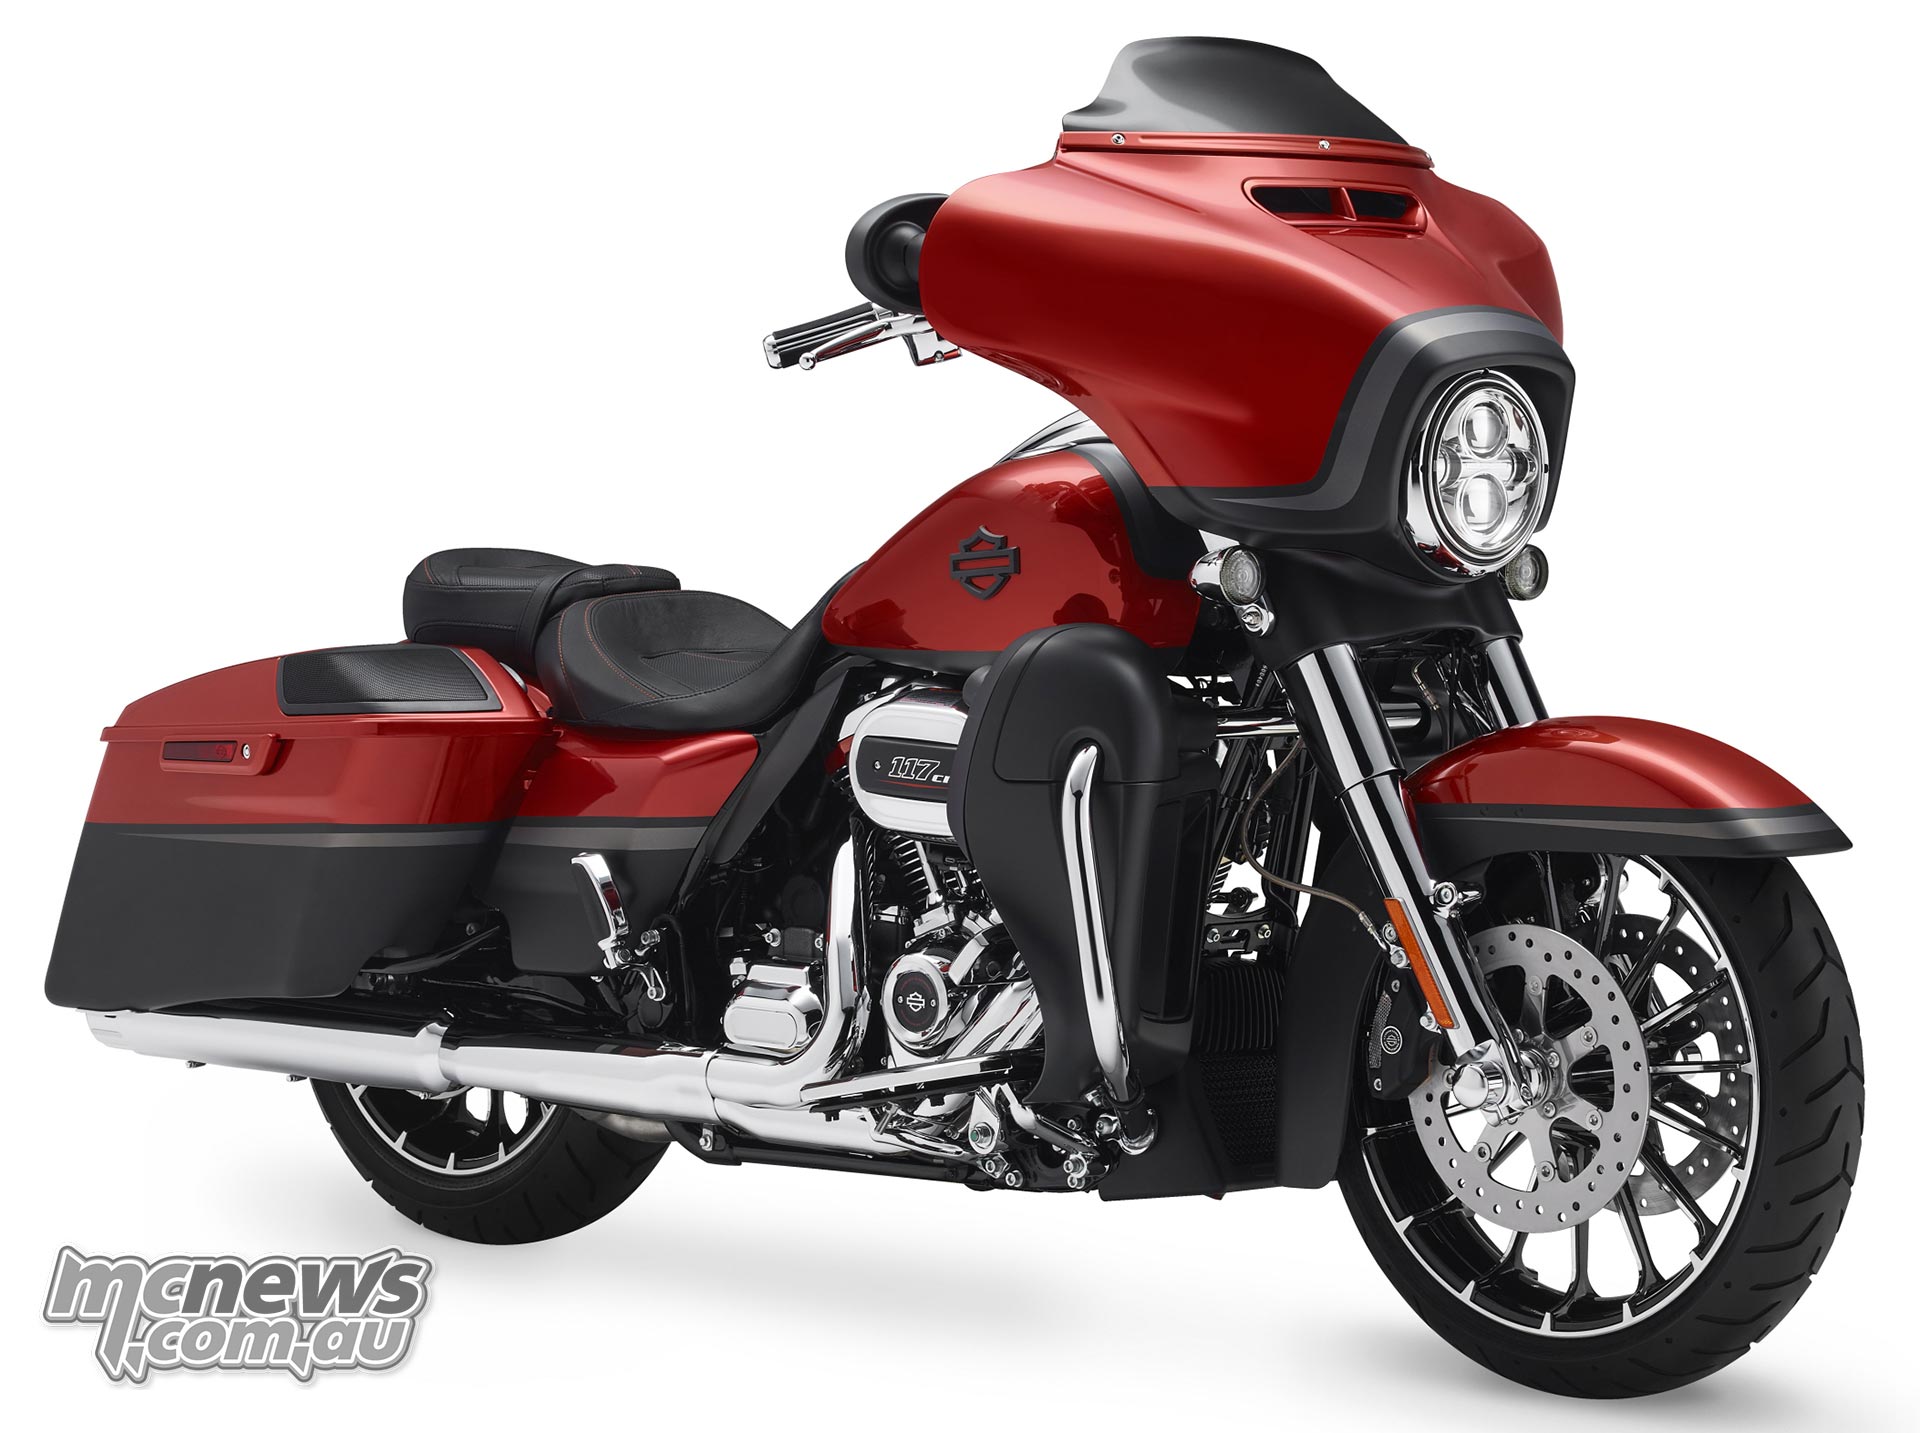 Cvo Tourers And Specials Top 2018 Harley Range Mcnews